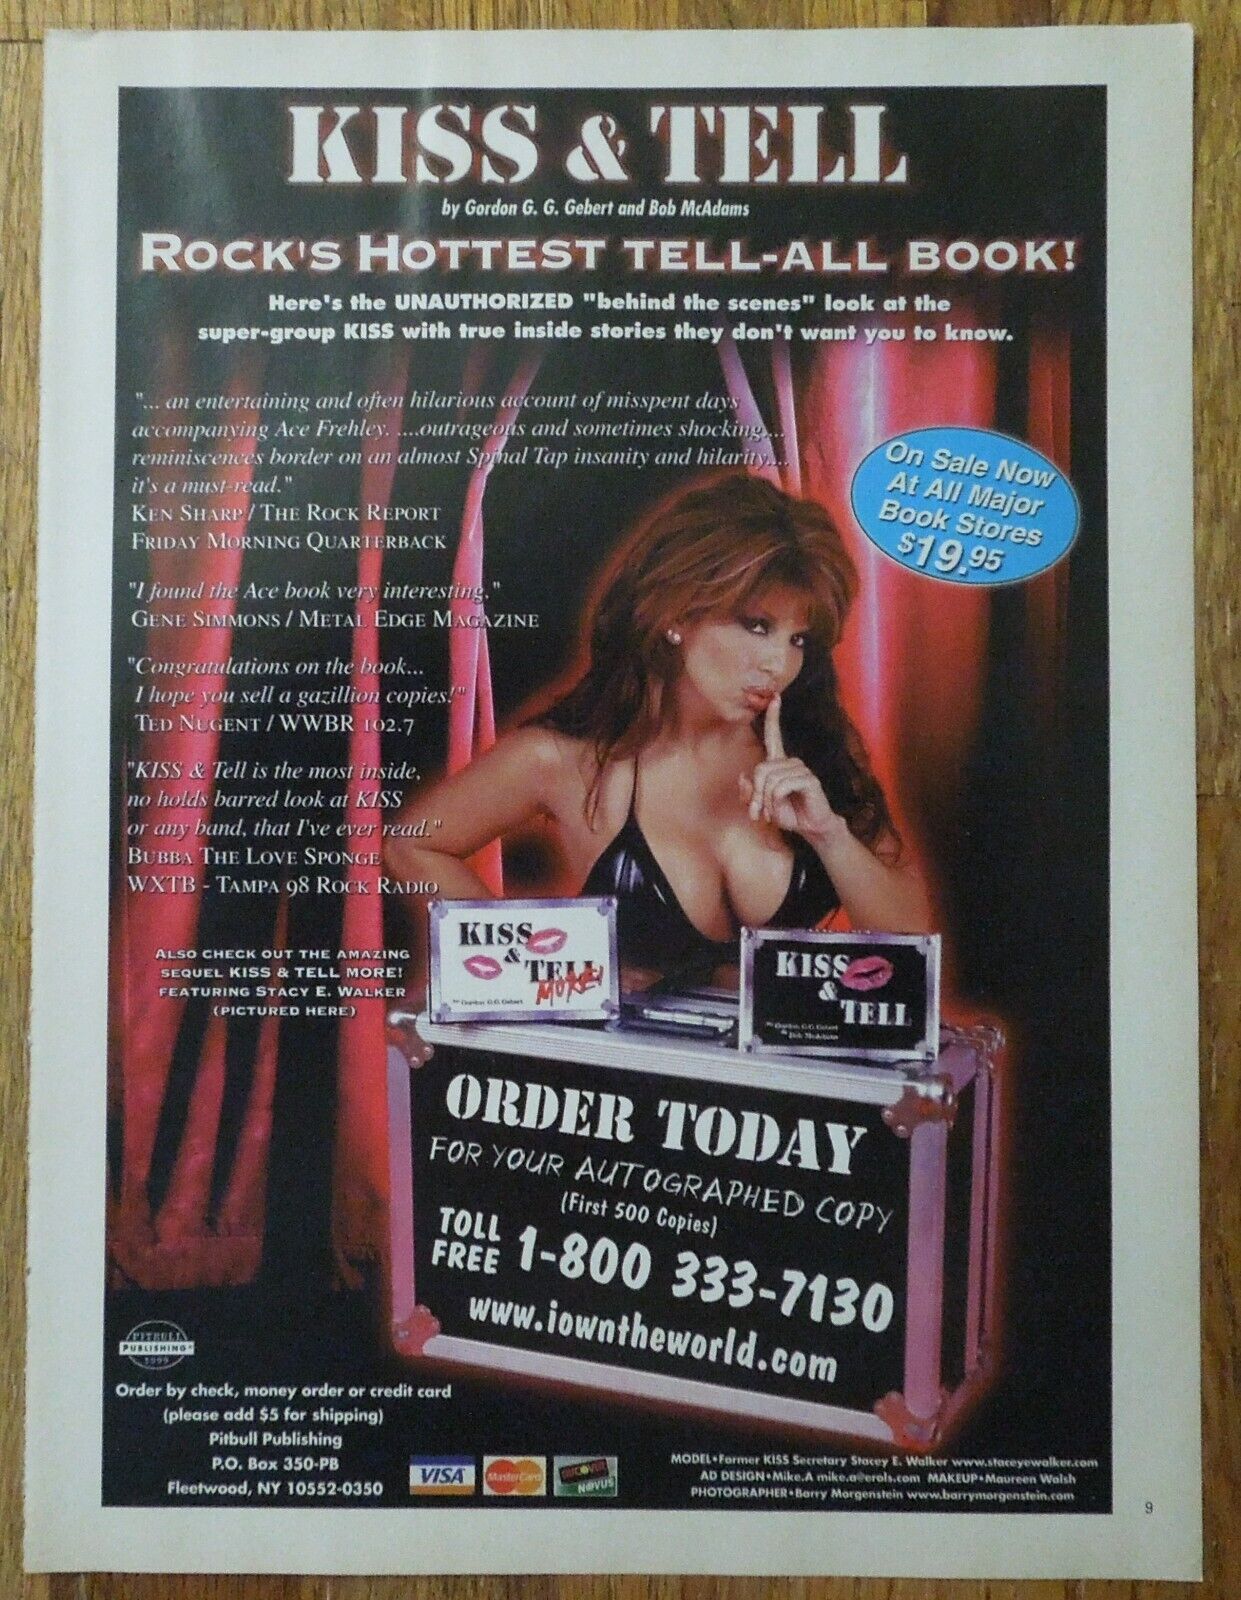 1999 KISS & TELL Rock's Hottest Tell-All Book Magazine Ad